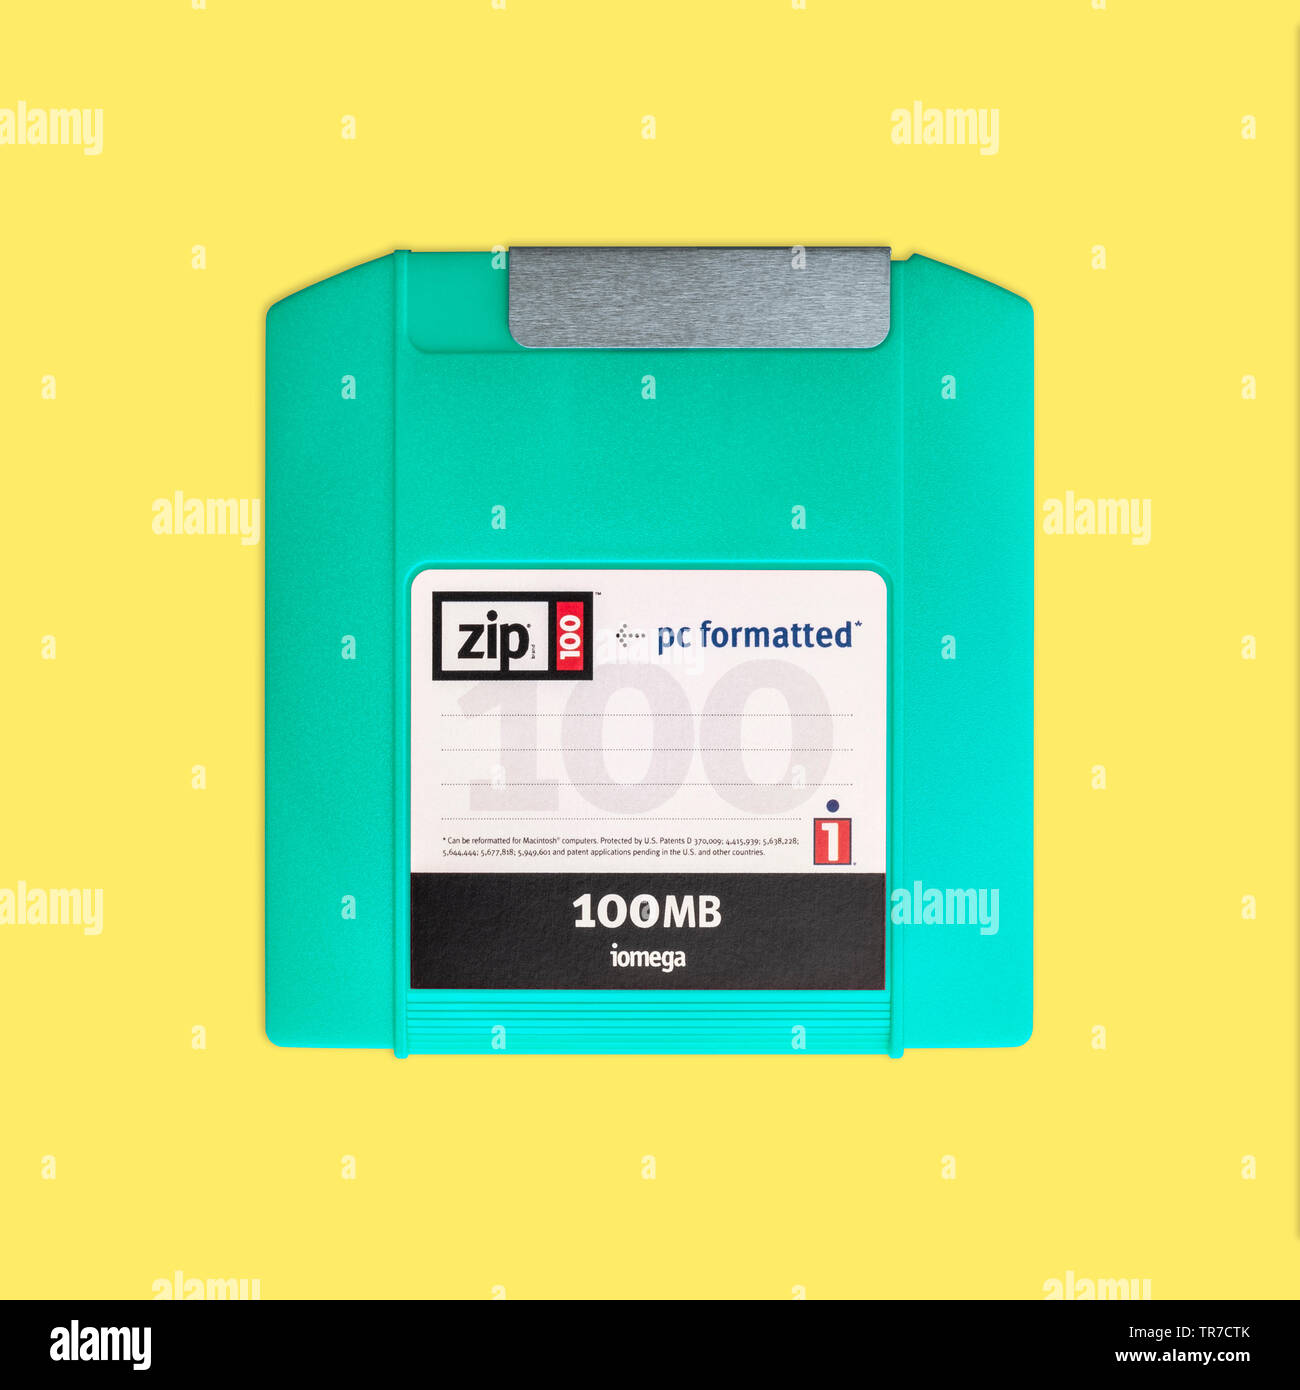 Iomega zip disk front nostalgia, isolated and presented in punchy pastel colors, for creative design cover, poster, book, printing, web and print Stock Photo